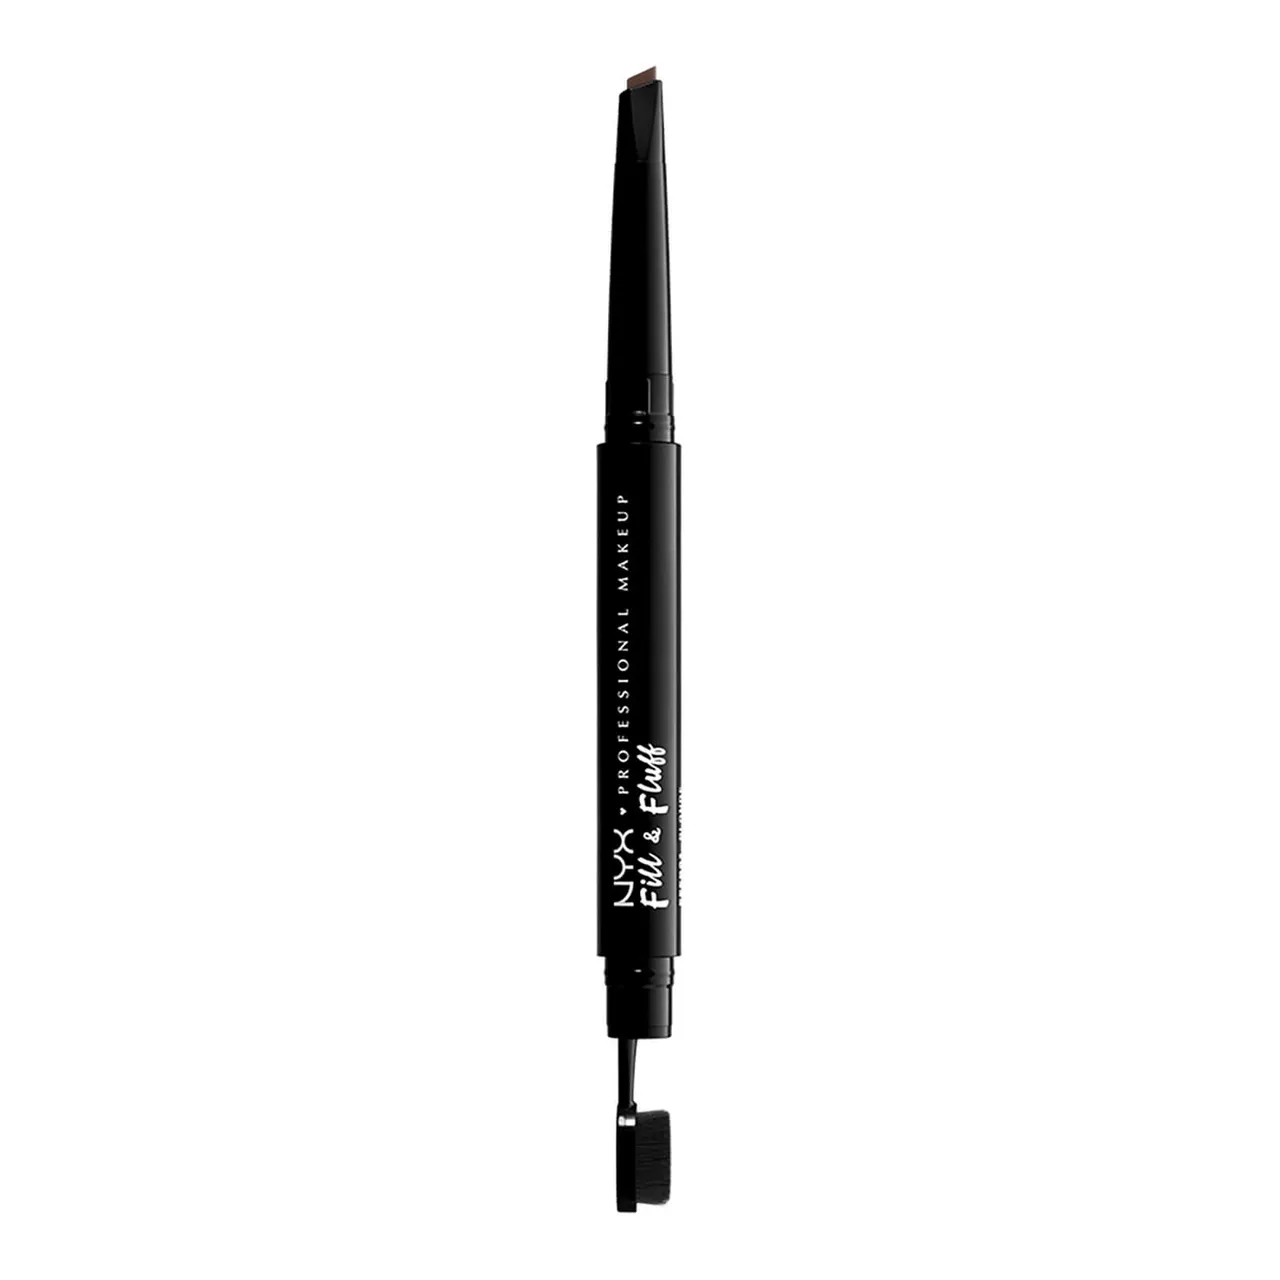 NYX Professional Makeup Fill and Fluff Eyebrow Pomade Pencil 0.2g (Various Shades) - Chocolate